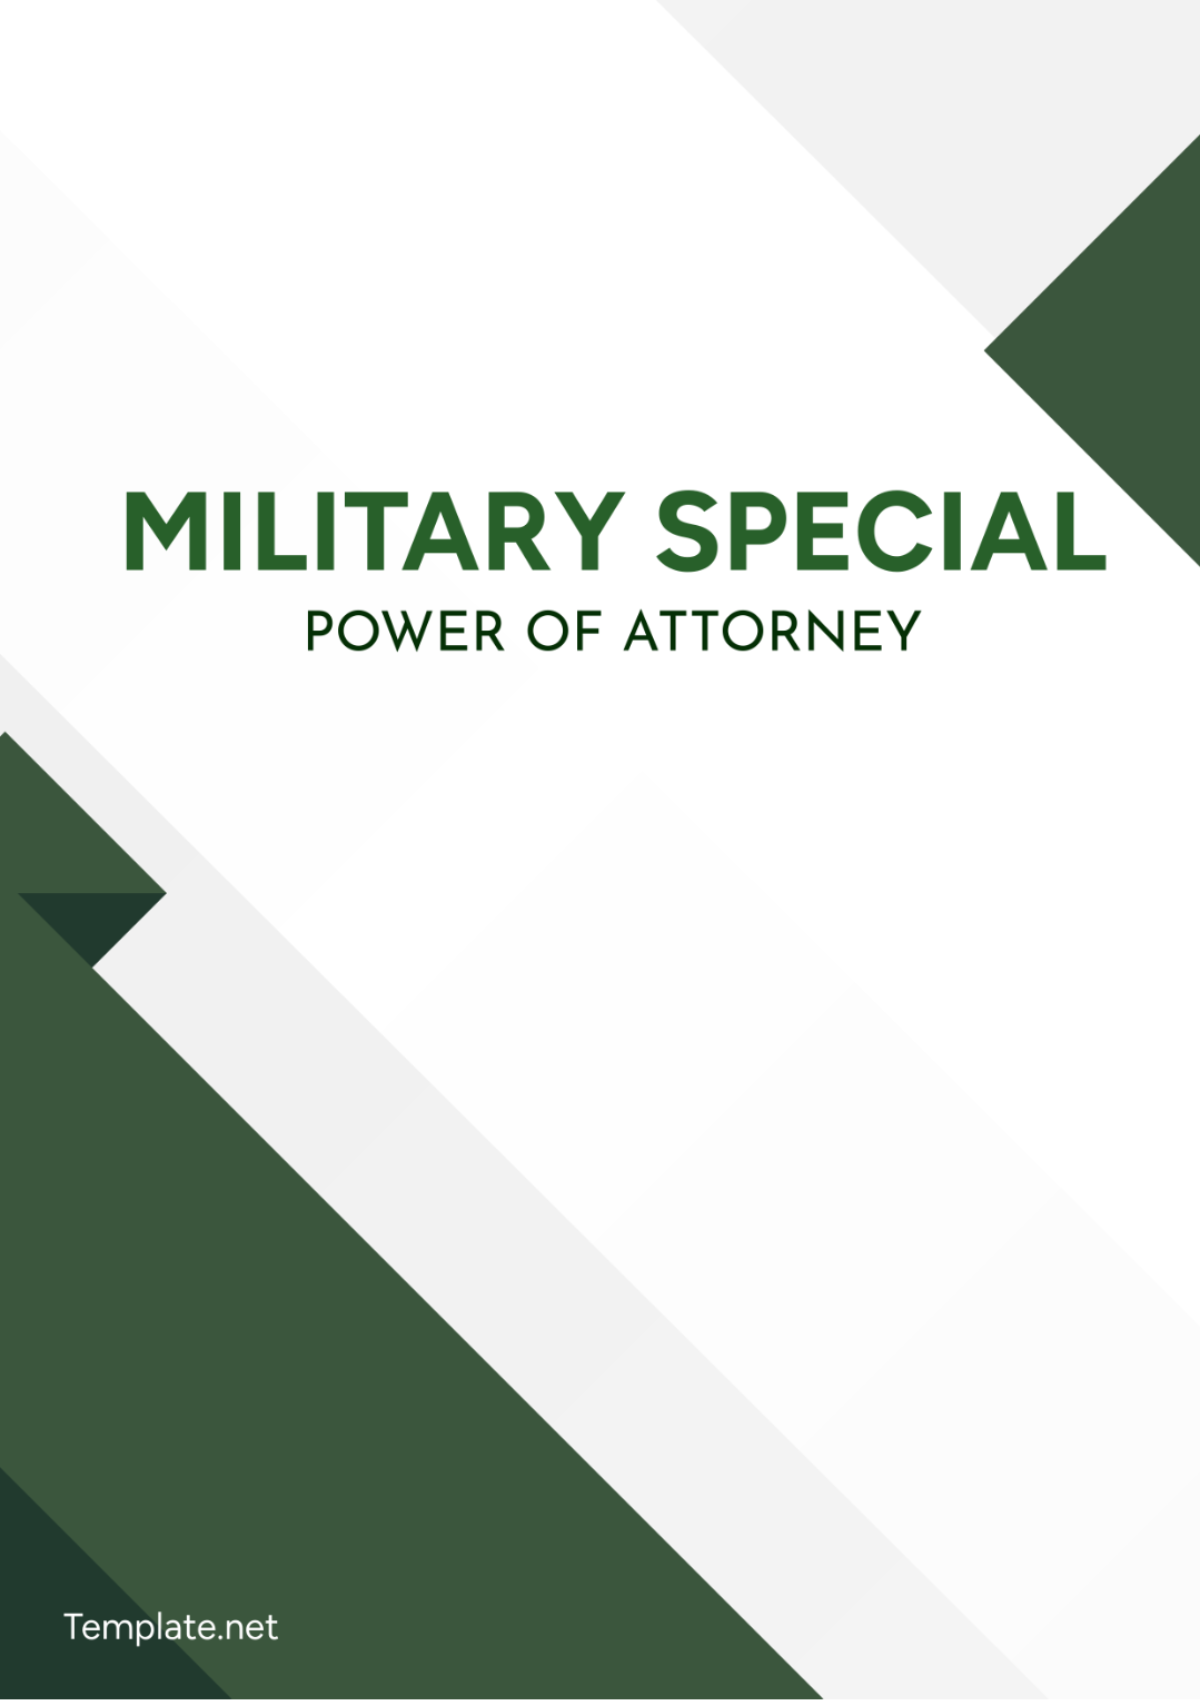 Military Special Power of Attorney Template